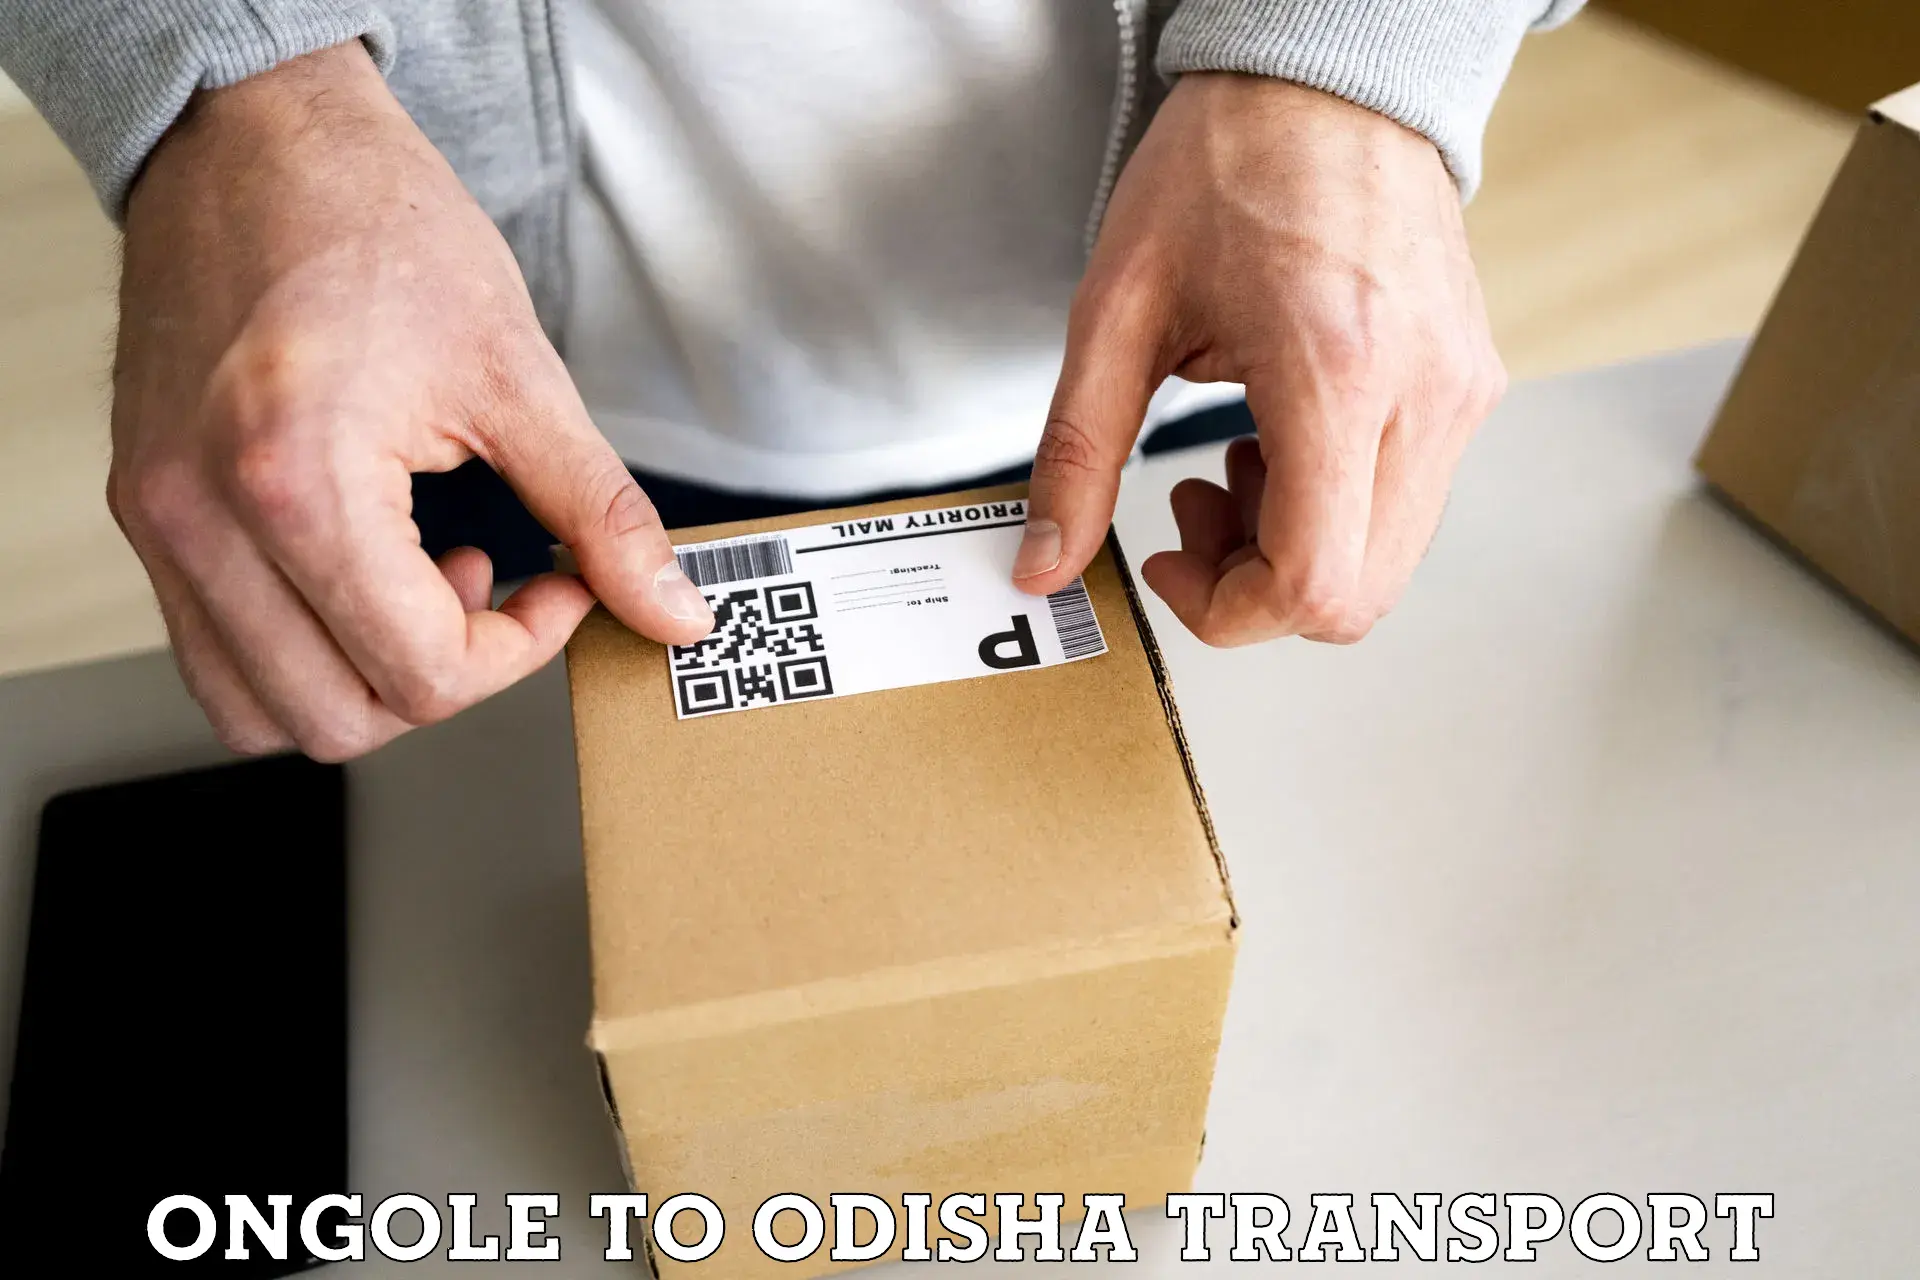 Daily transport service Ongole to Basta